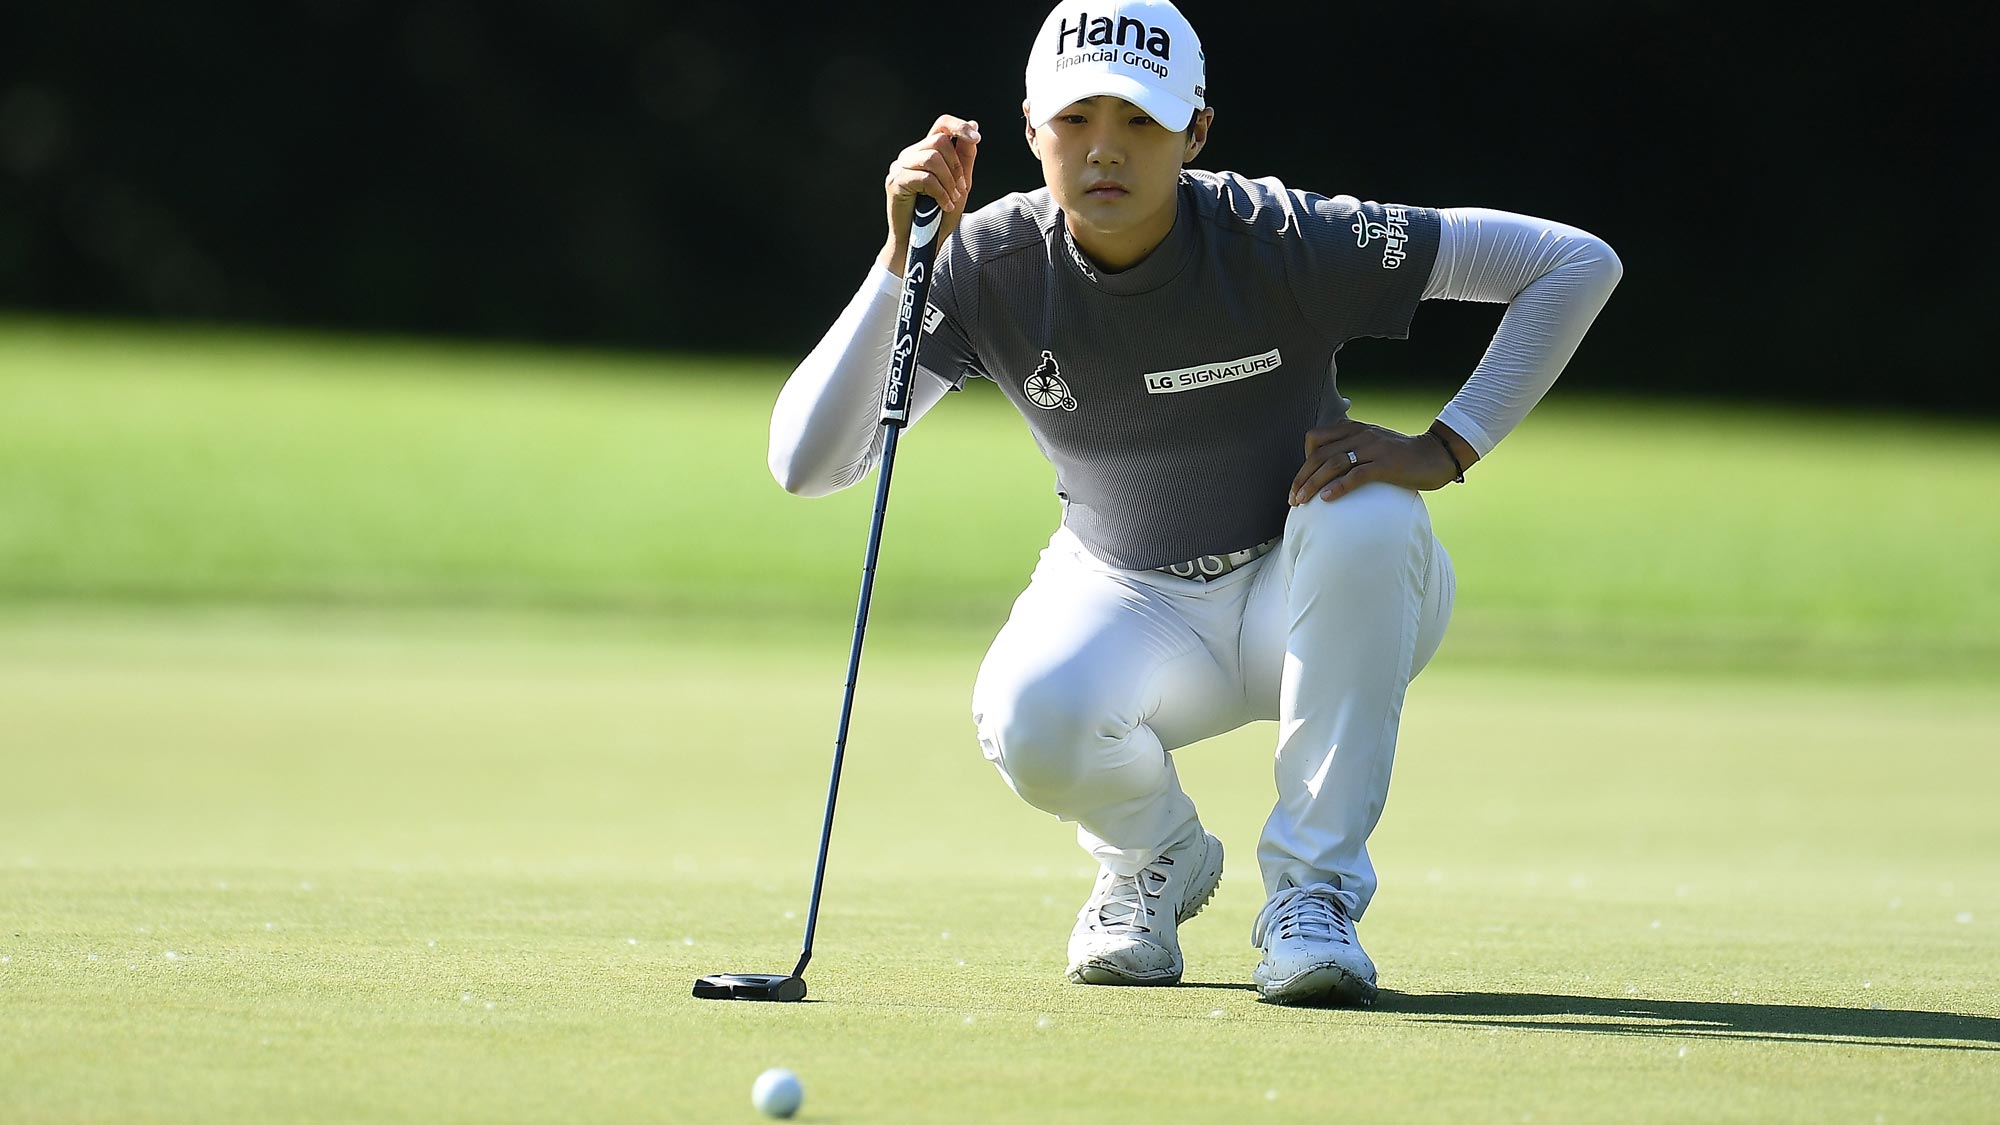 Sung Hyun Park of Korea lines up a putt on the 10th green during the second round of the KPMG Women's PGA Championship